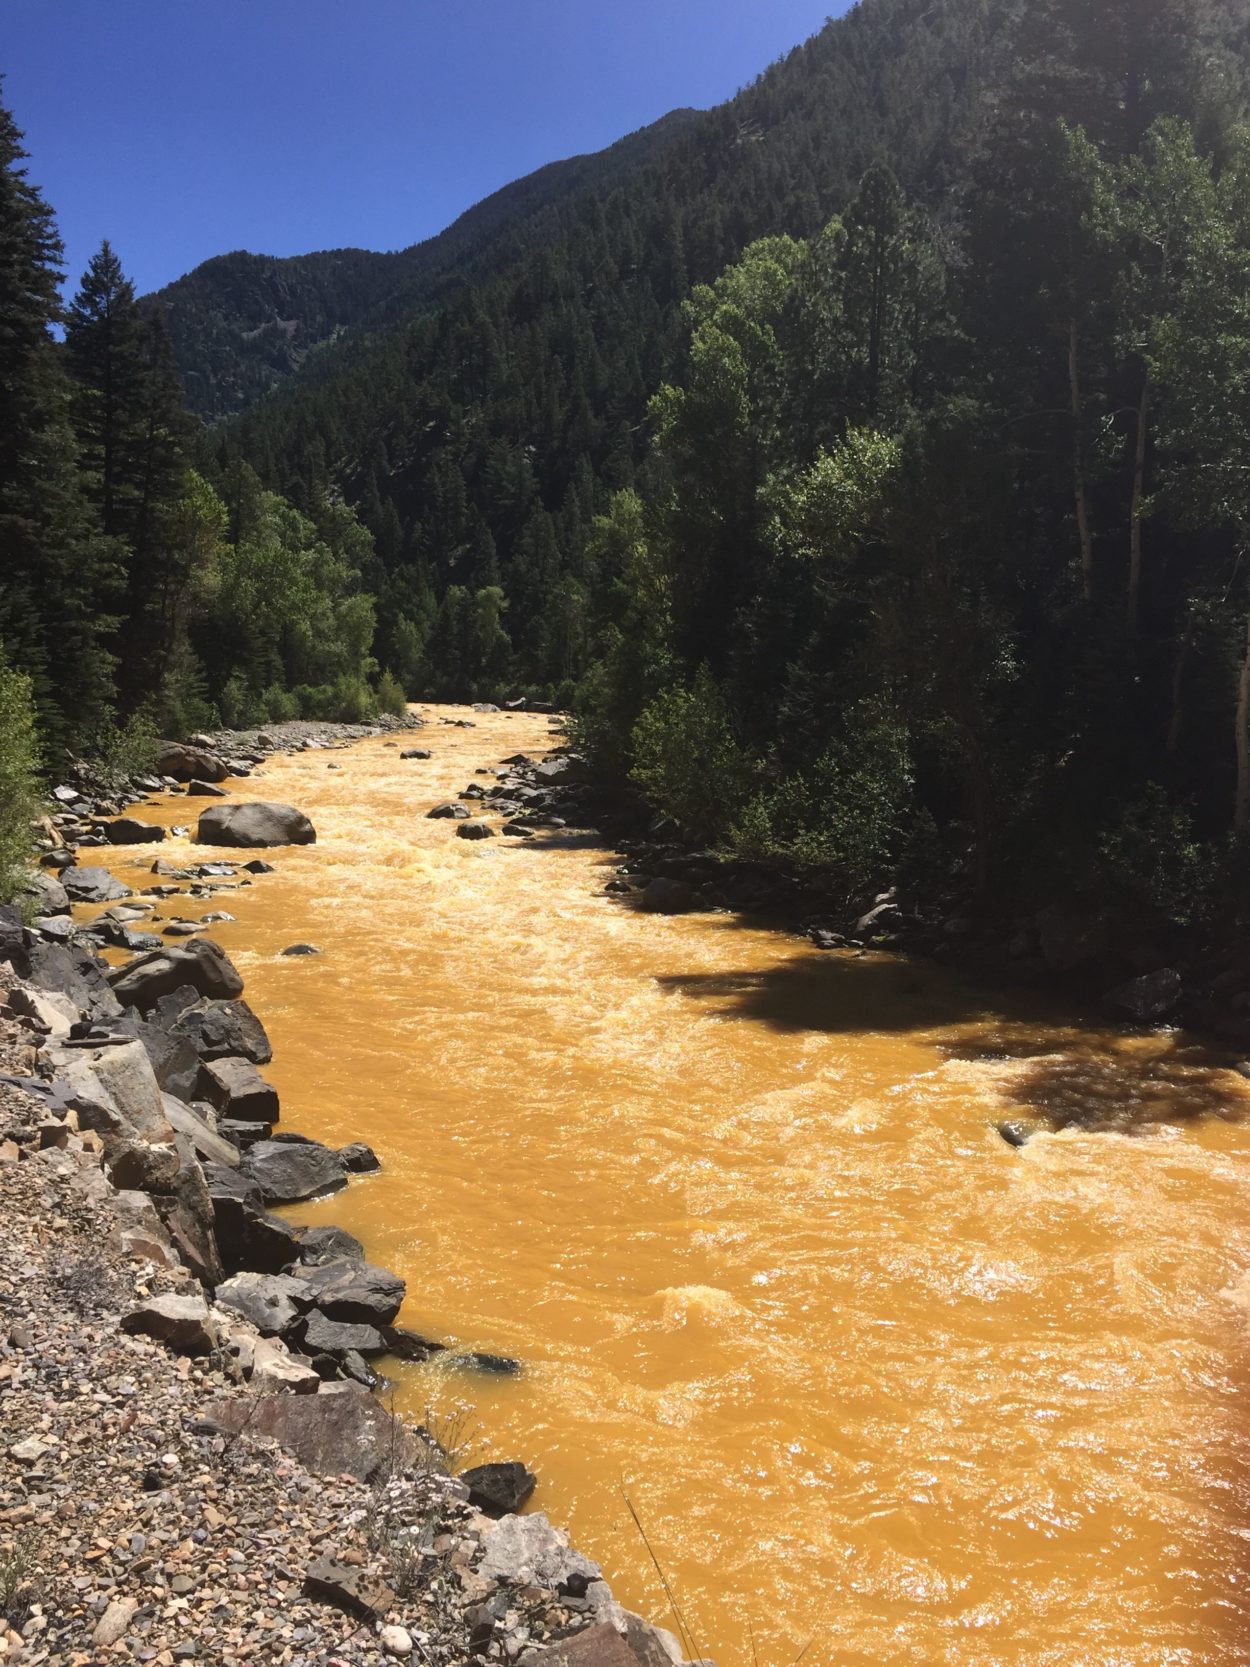 Restoration project proposals sought for rivers impacted by Gold King Mine spill